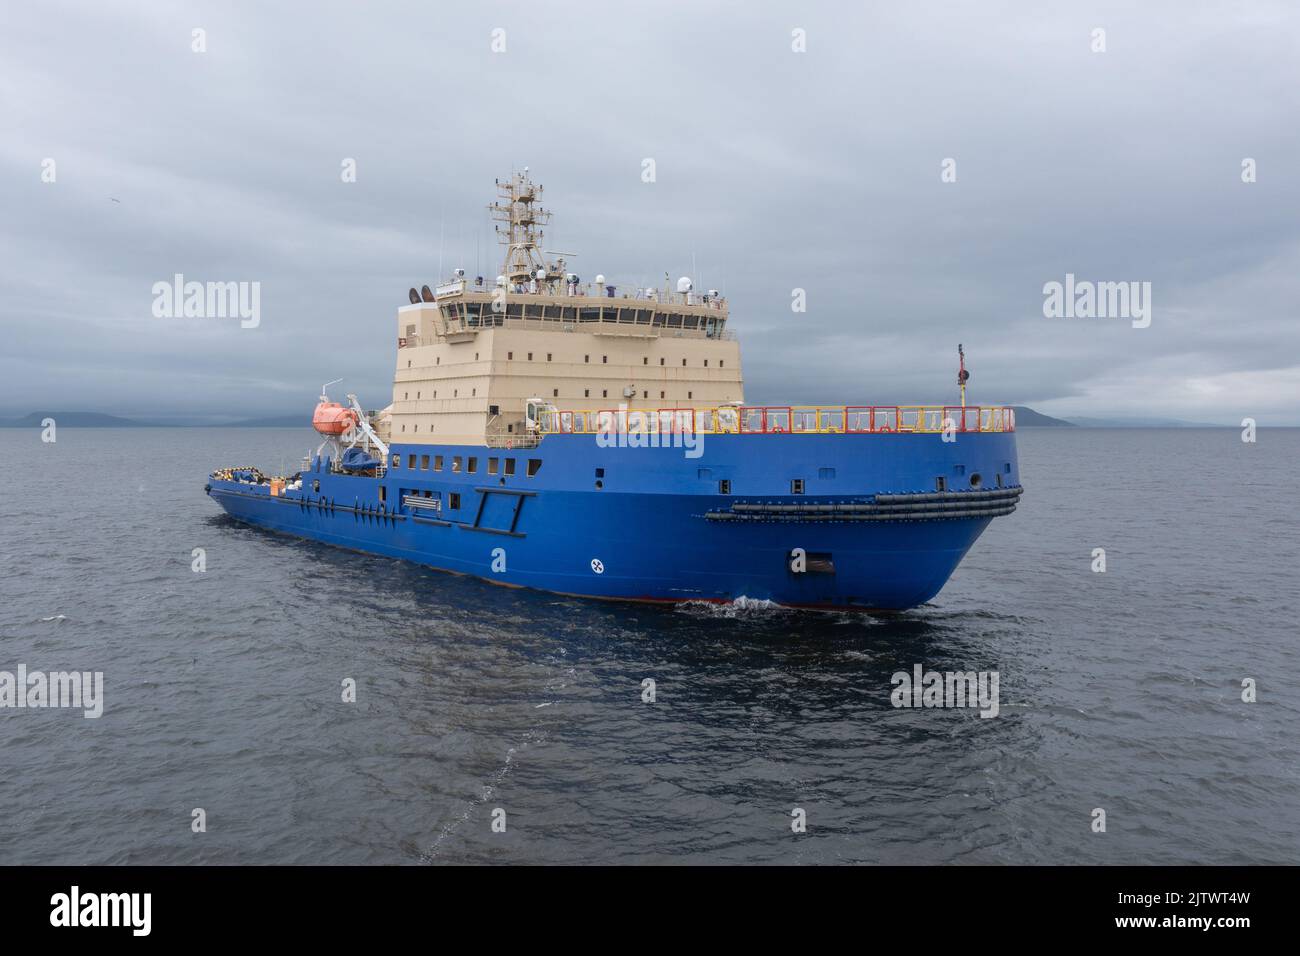 The ice breaker with a platform for helicopter landing, in the middle of a gulf. Stock Photo